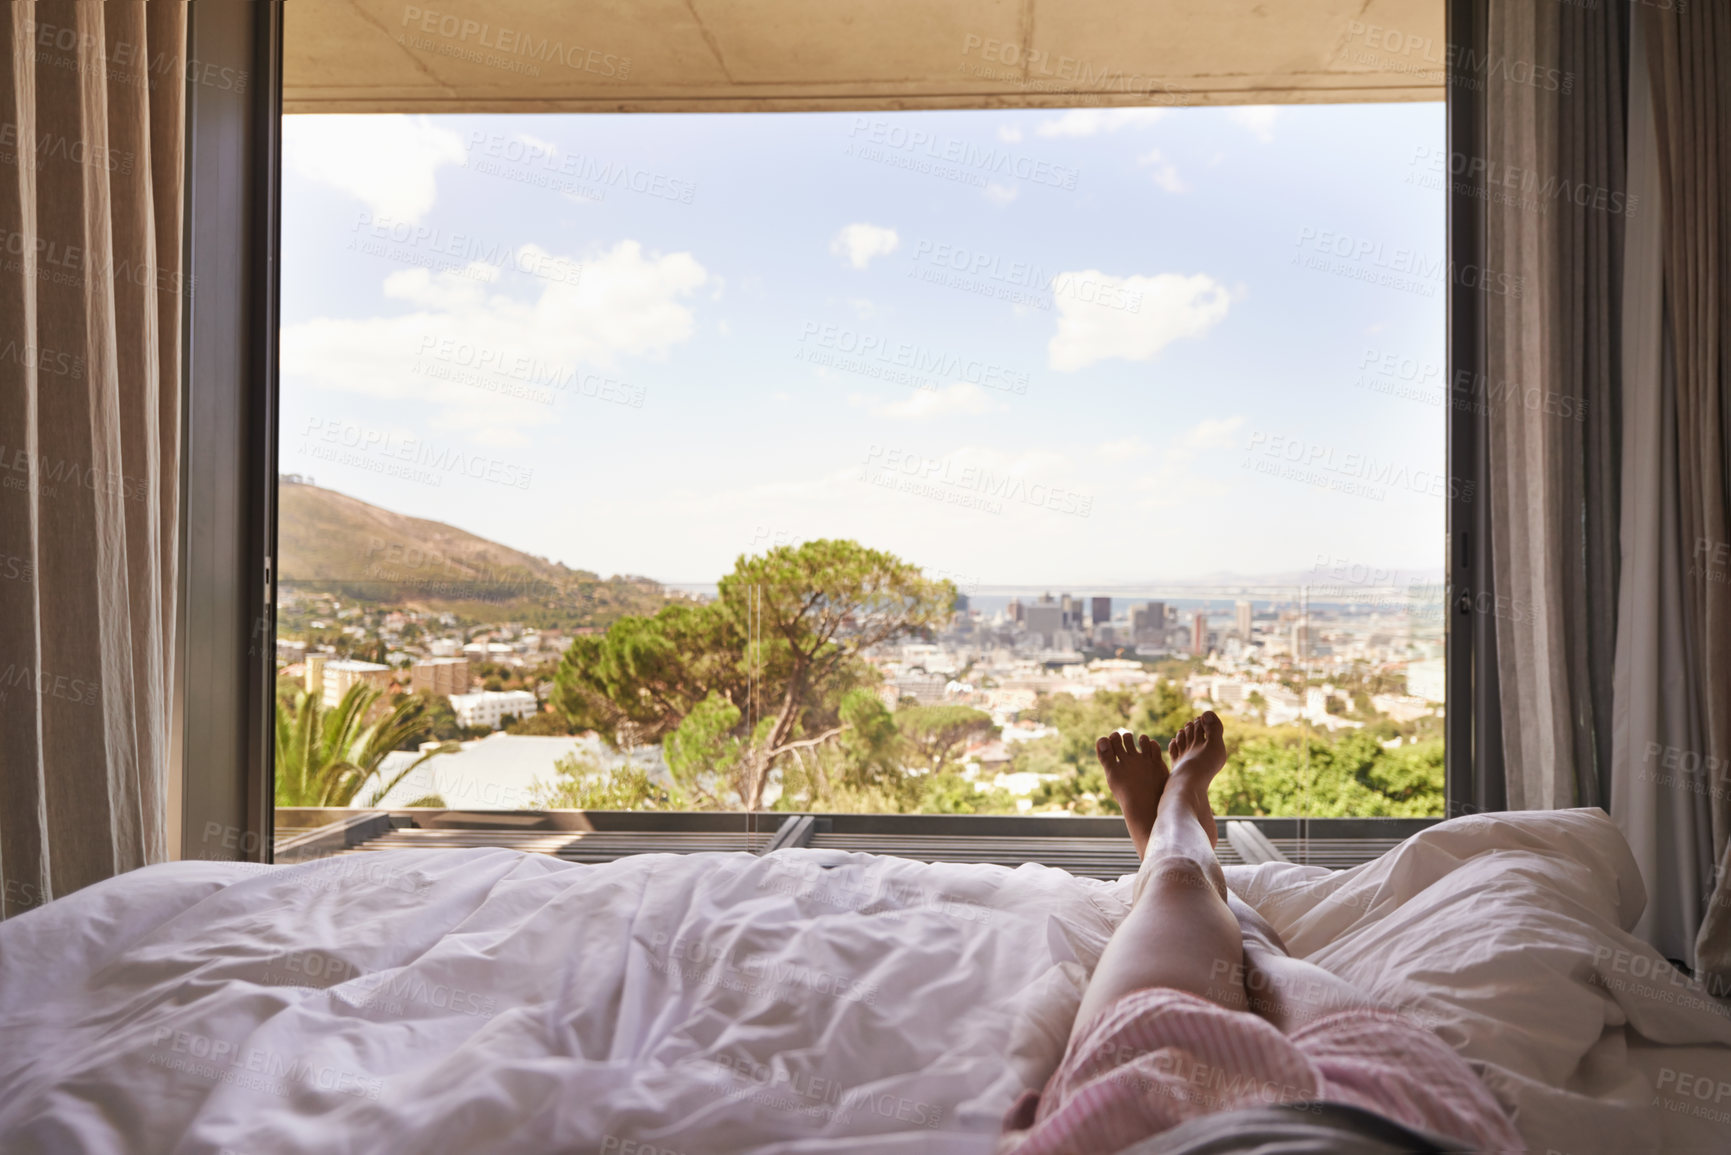 Buy stock photo Window view, bedroom, relax and legs on holiday, morning relaxation and wake up. Apartment, stress relief and the feet of a person during a vacation with views of nature and the city from bed